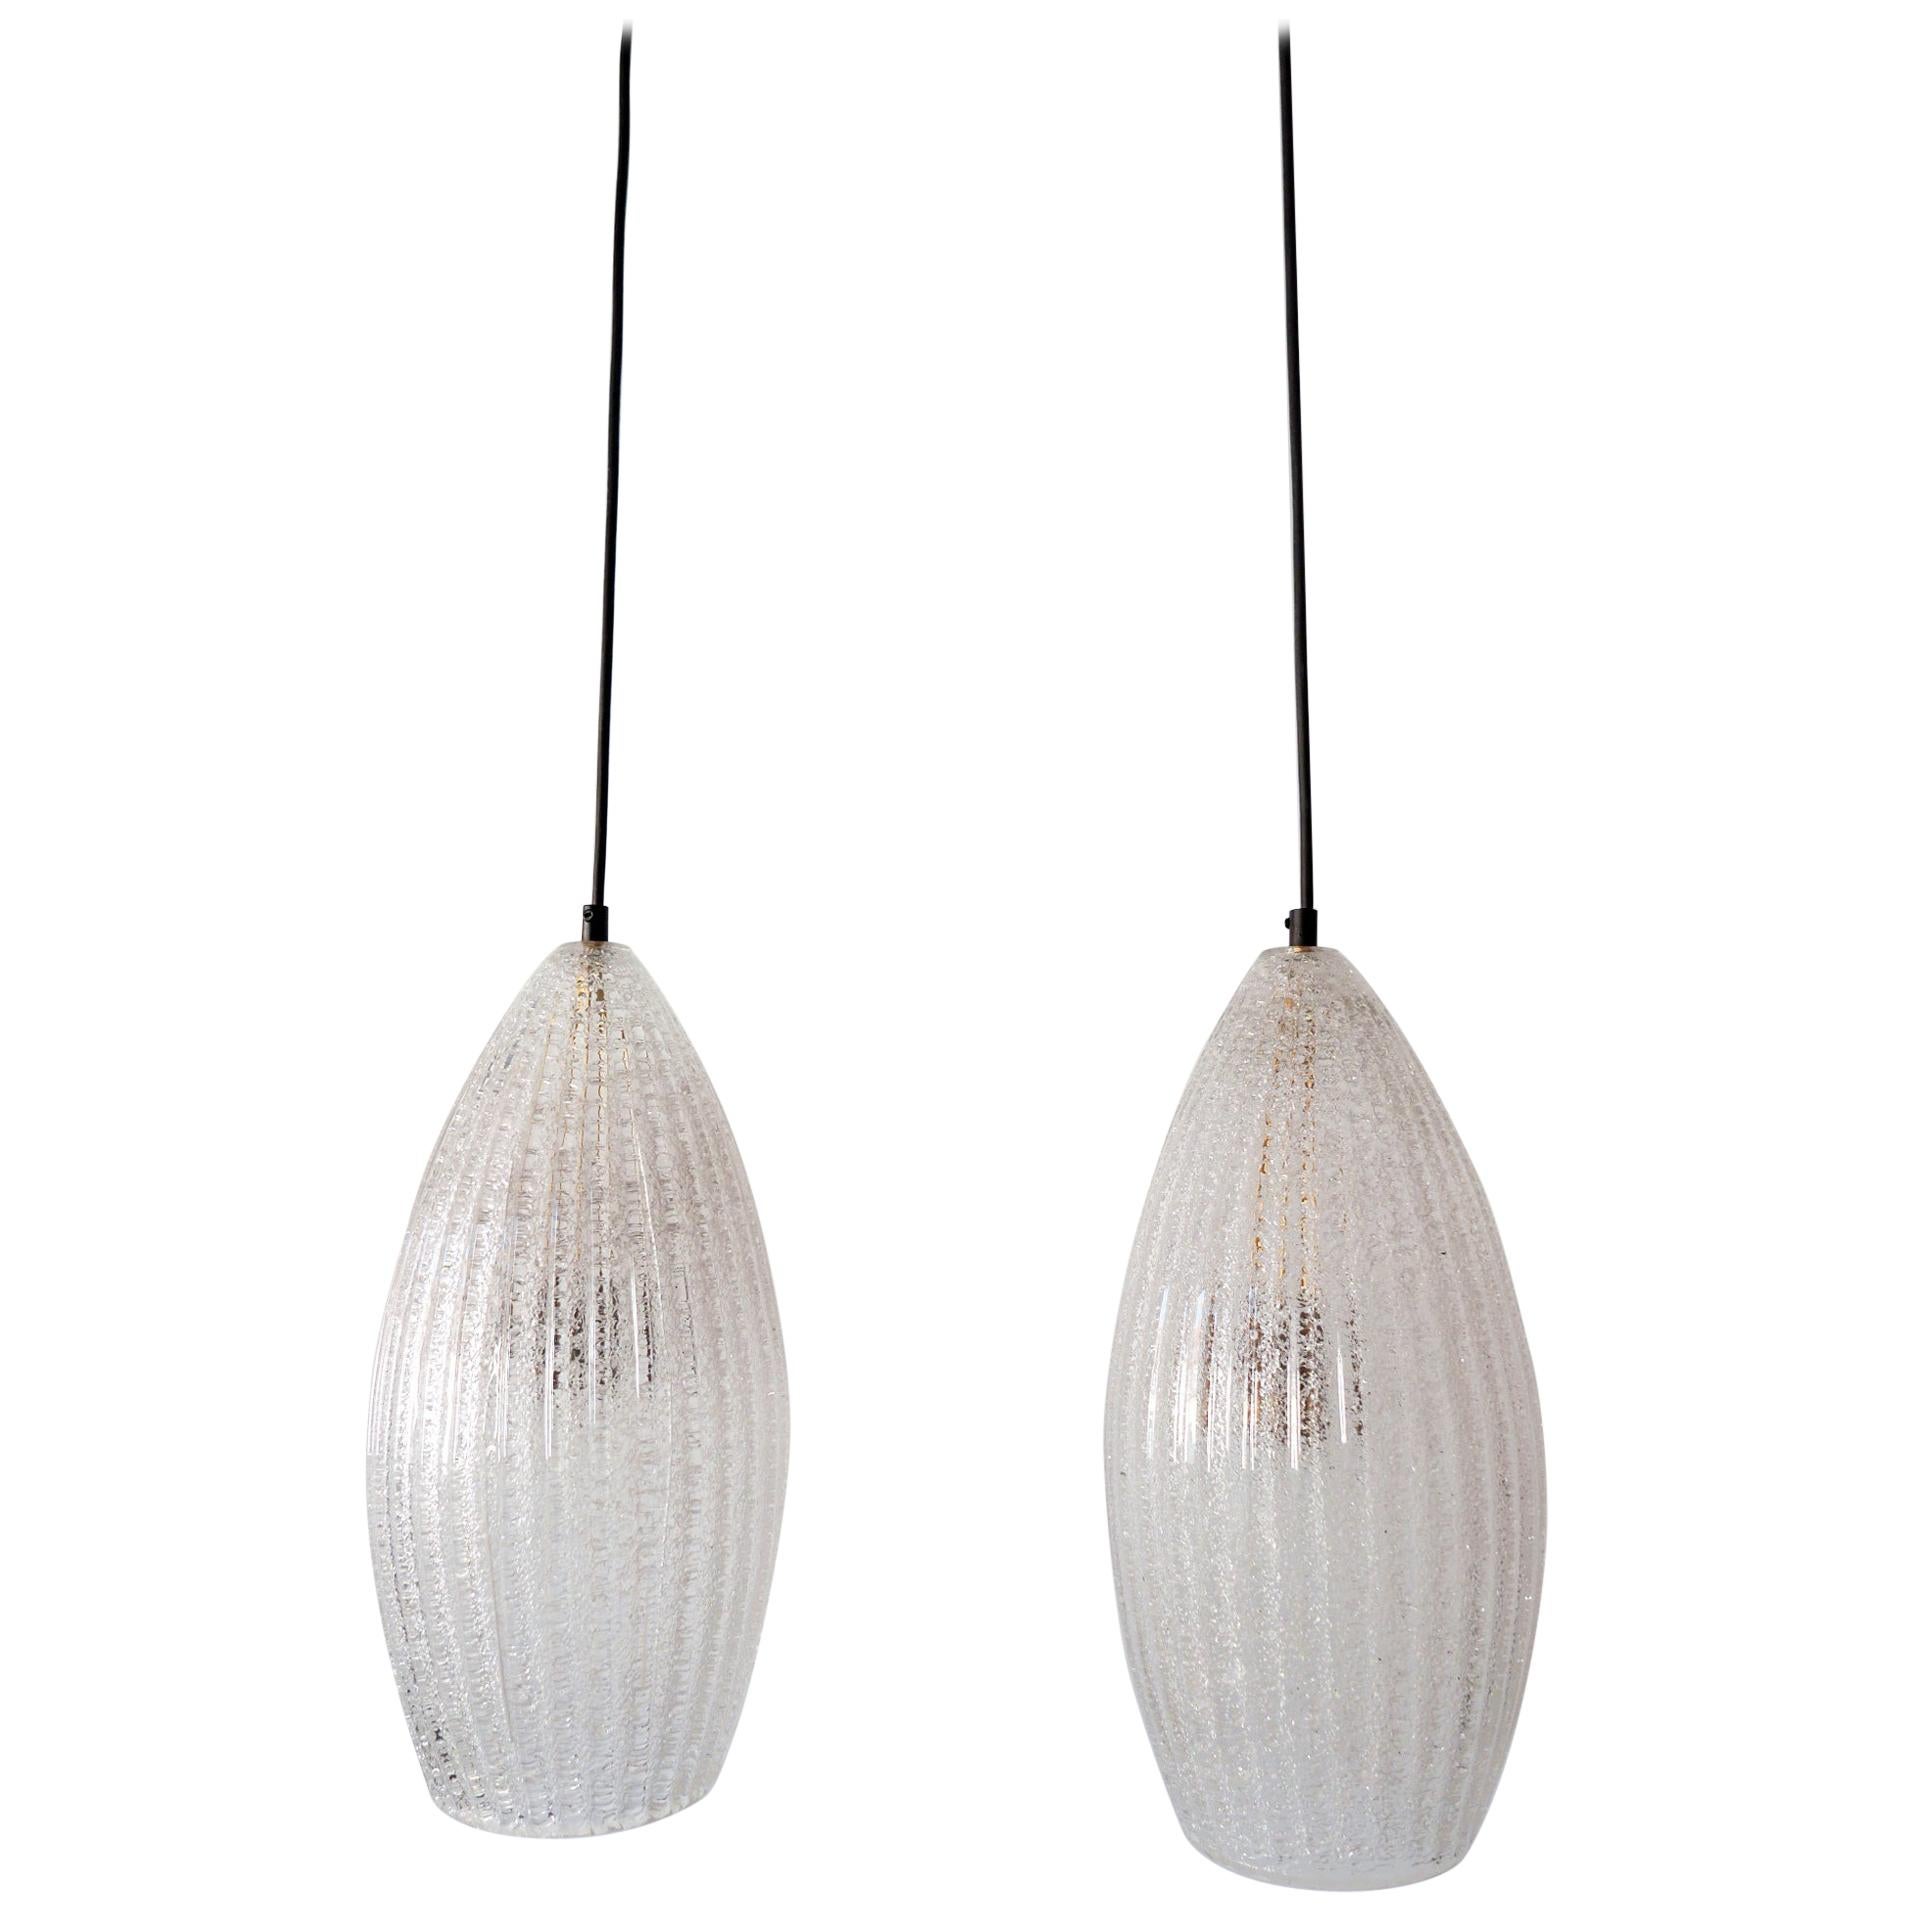 Set of Two Mid-Century Modern Textured Glass Pendant Lamps, 1960s, Germany